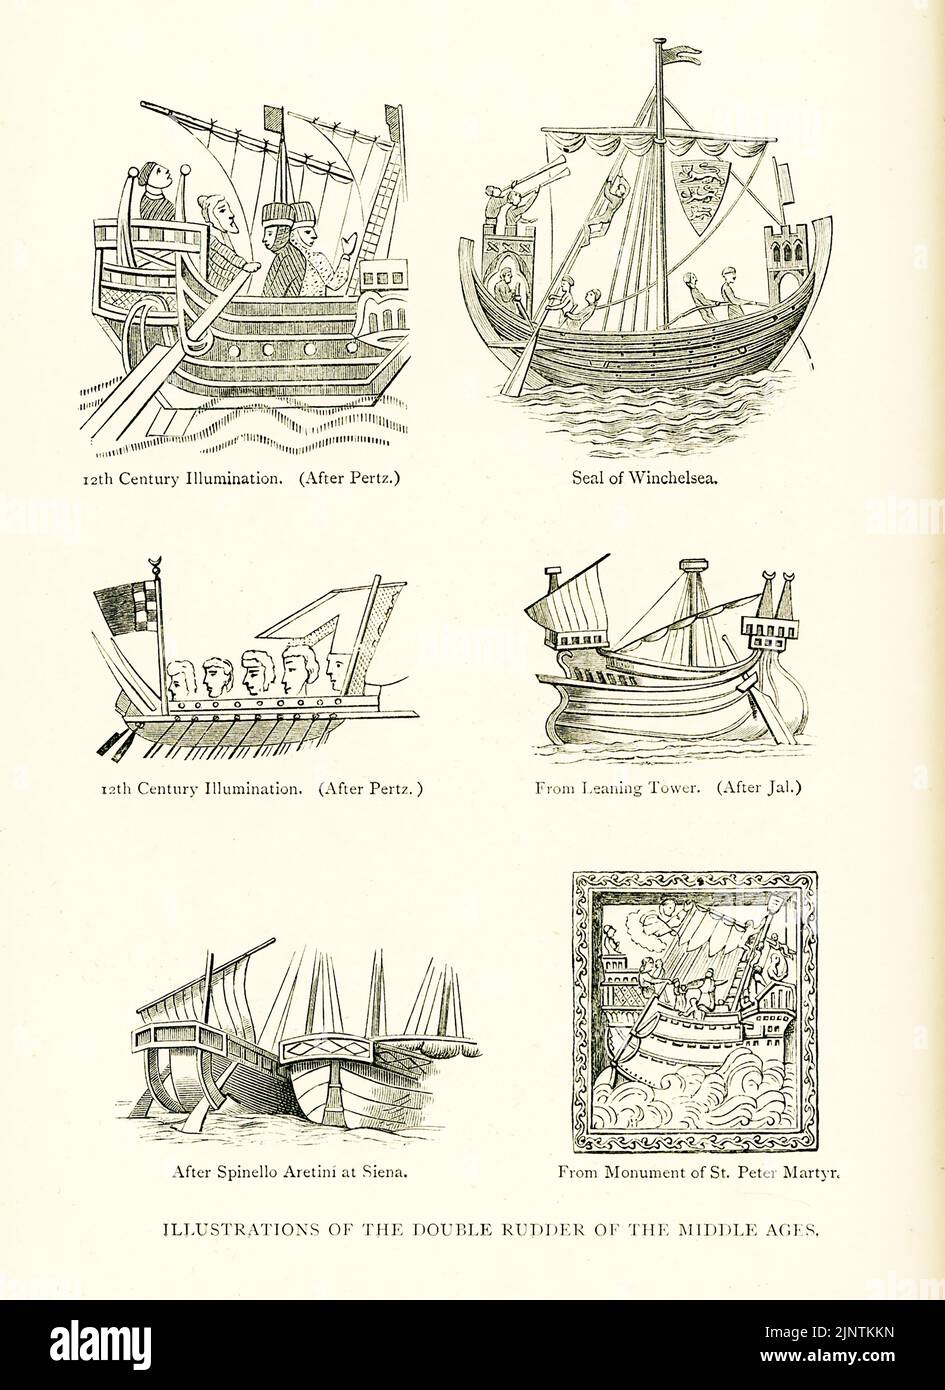 The caption for this map from The Travels of Marco Polo Vol I  as translated by Henry Yule reads: “Illustrations of the Double Rudder of the Middle Ages.” They are from top to bottom, left to right: 12th century Illumination (after Pertz; Seal of Winchelsea; 12th century Illumination (after Pertz); from Leaning Tower (after Jal); after Spinello Aretini at Siena; from Monument of St Peter Martyr.” Marco Polo was a Venetian traveler who left Venice, Italy, with his father Niccolo and uncle Maffeo in 1271. He arrived in China in 1275 where Kublai Khan had his court, and returned home in 1294.  No Stock Photo